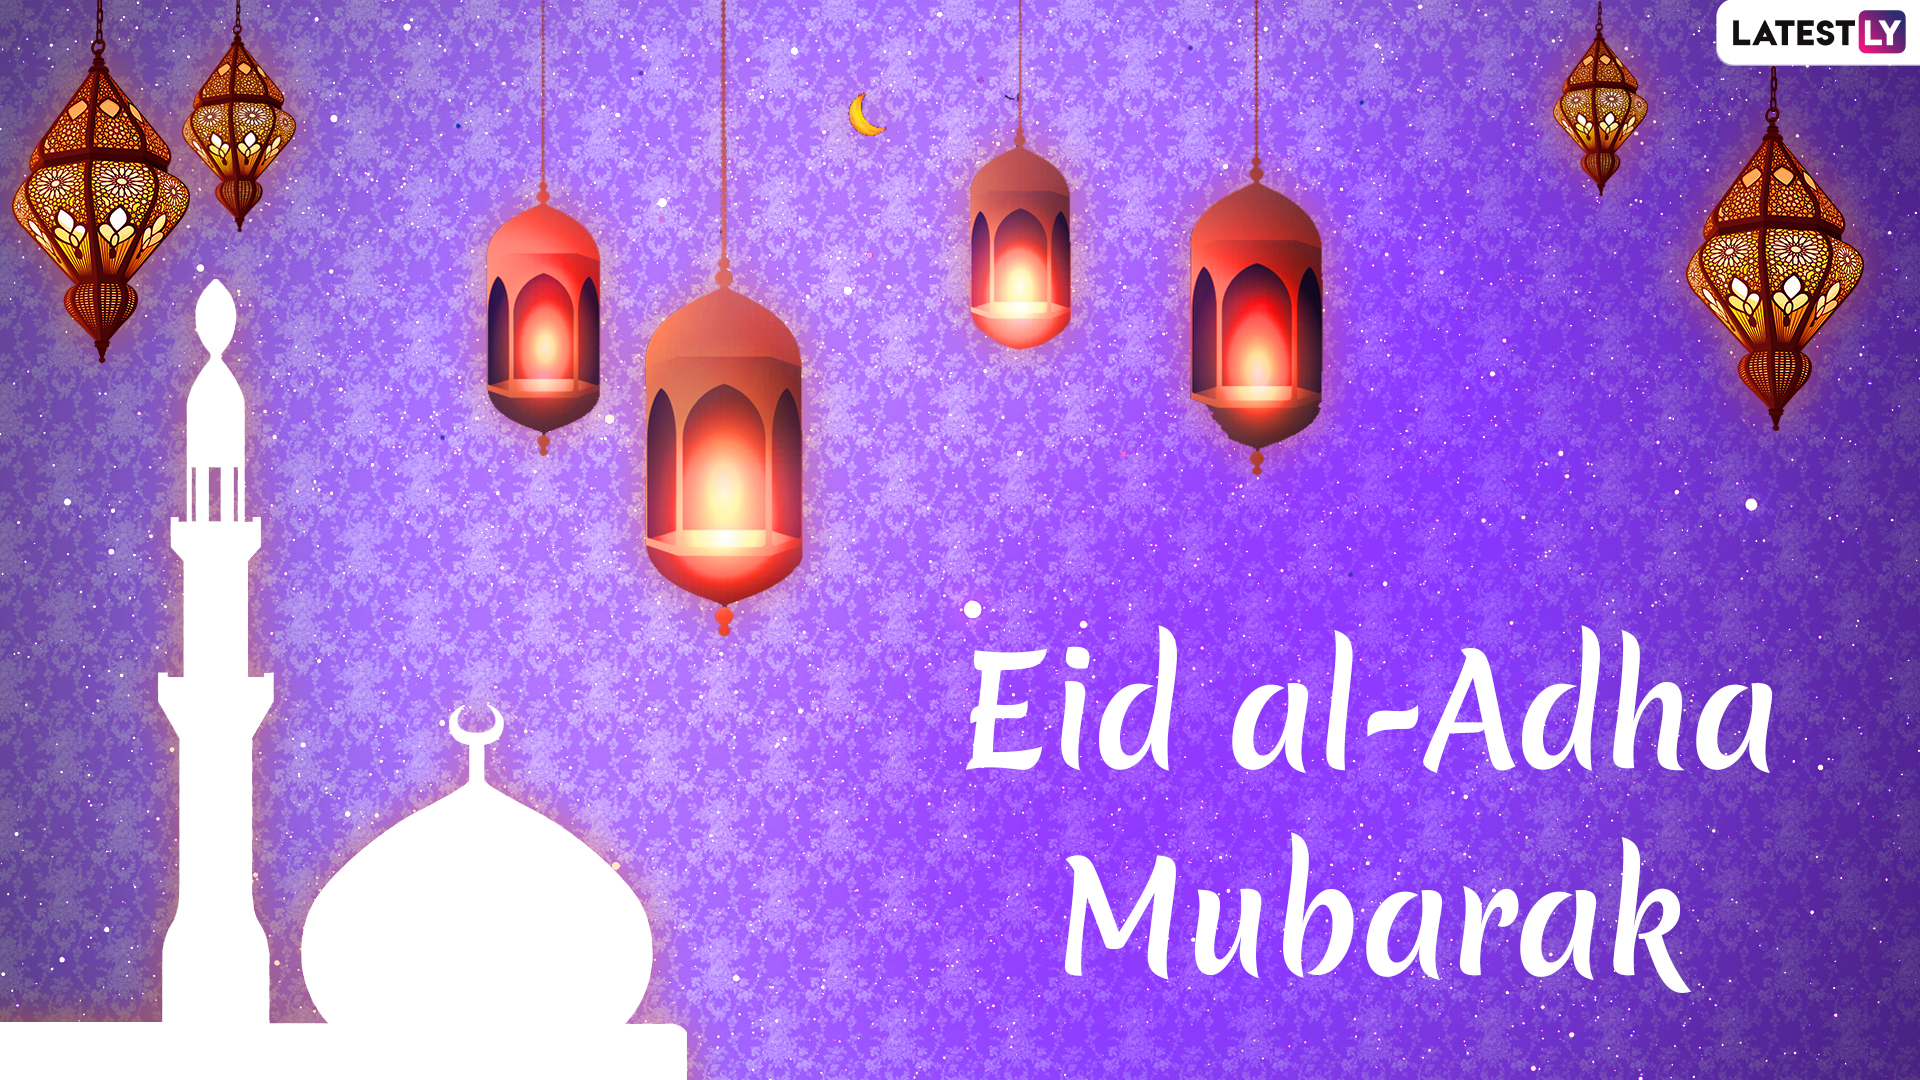 Eid al-Adha Mubarak Images and HD Wallpapers For Free Download Online